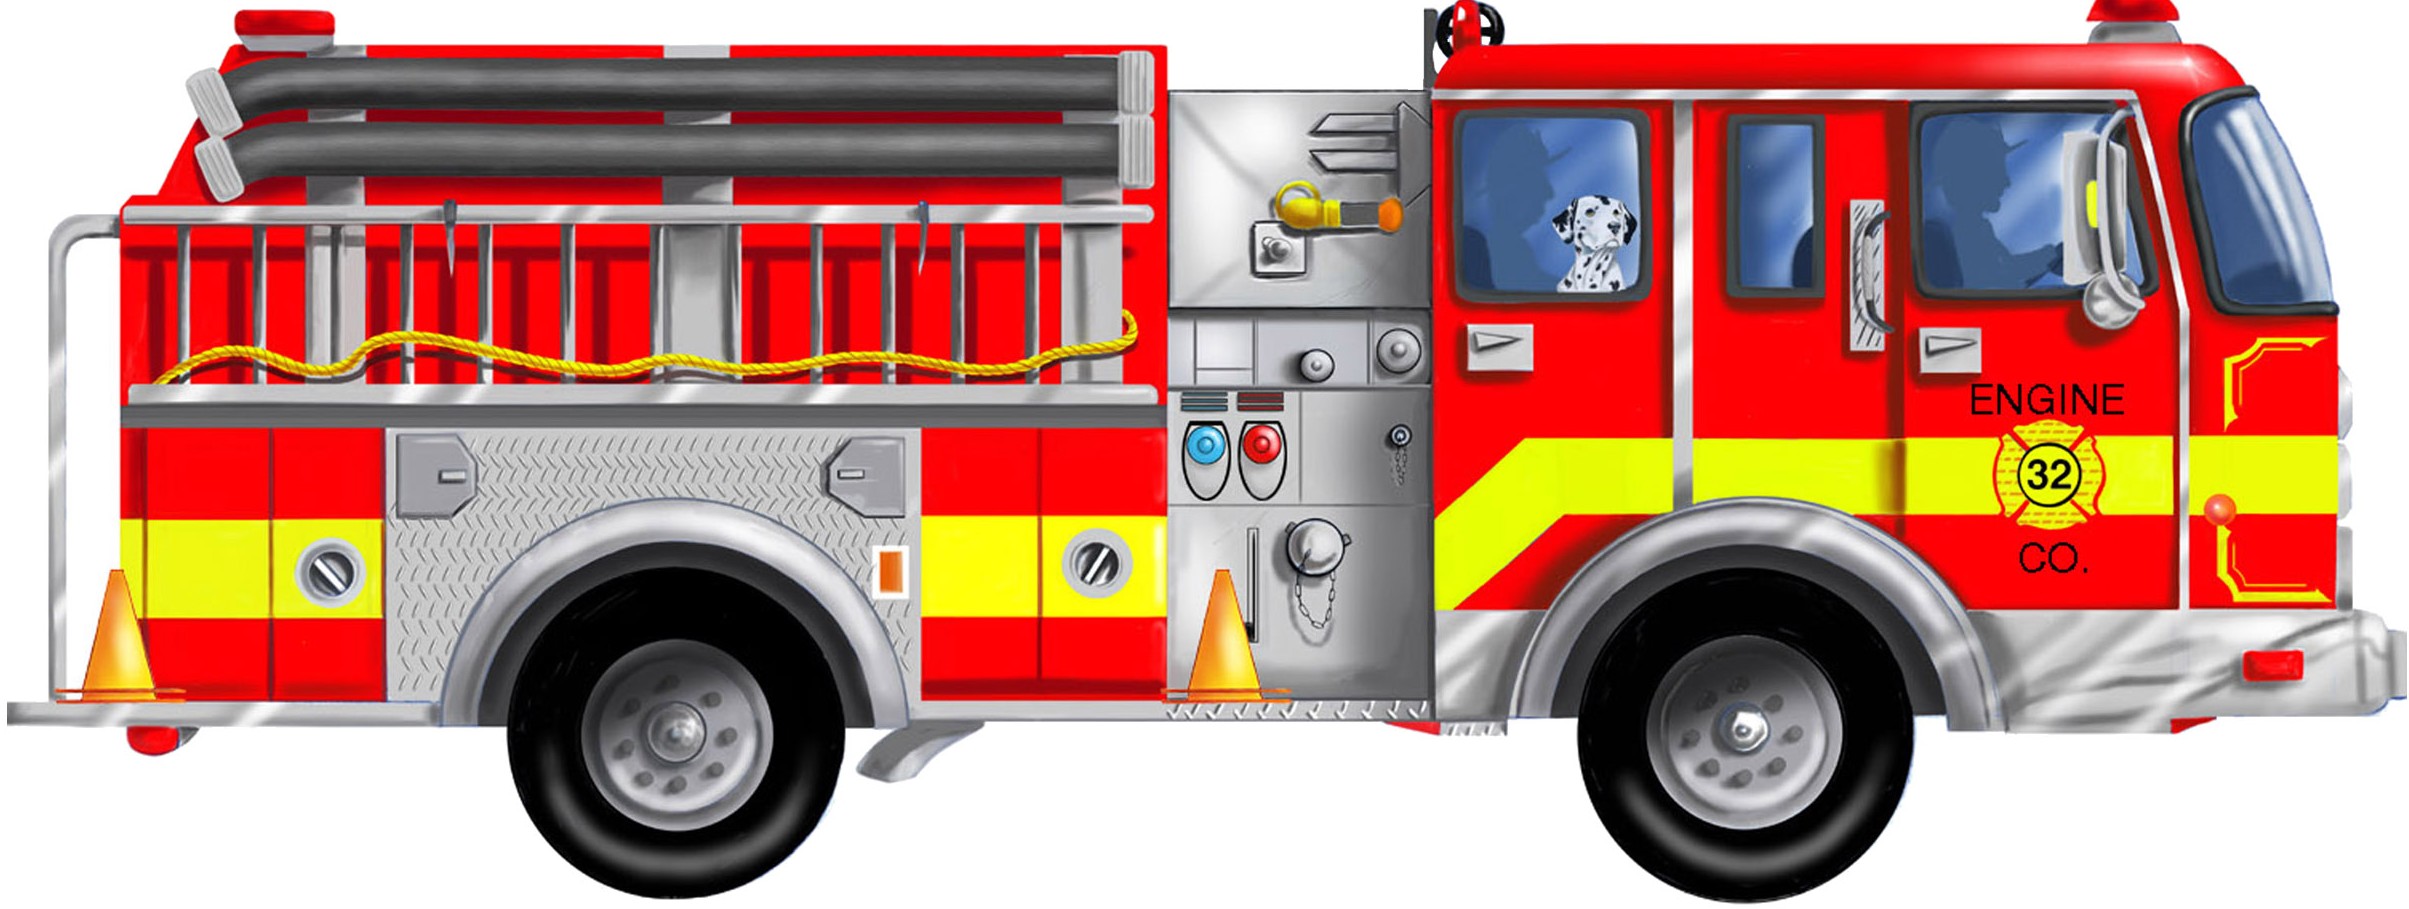 Free Printable Fire Truck Template For Preschool